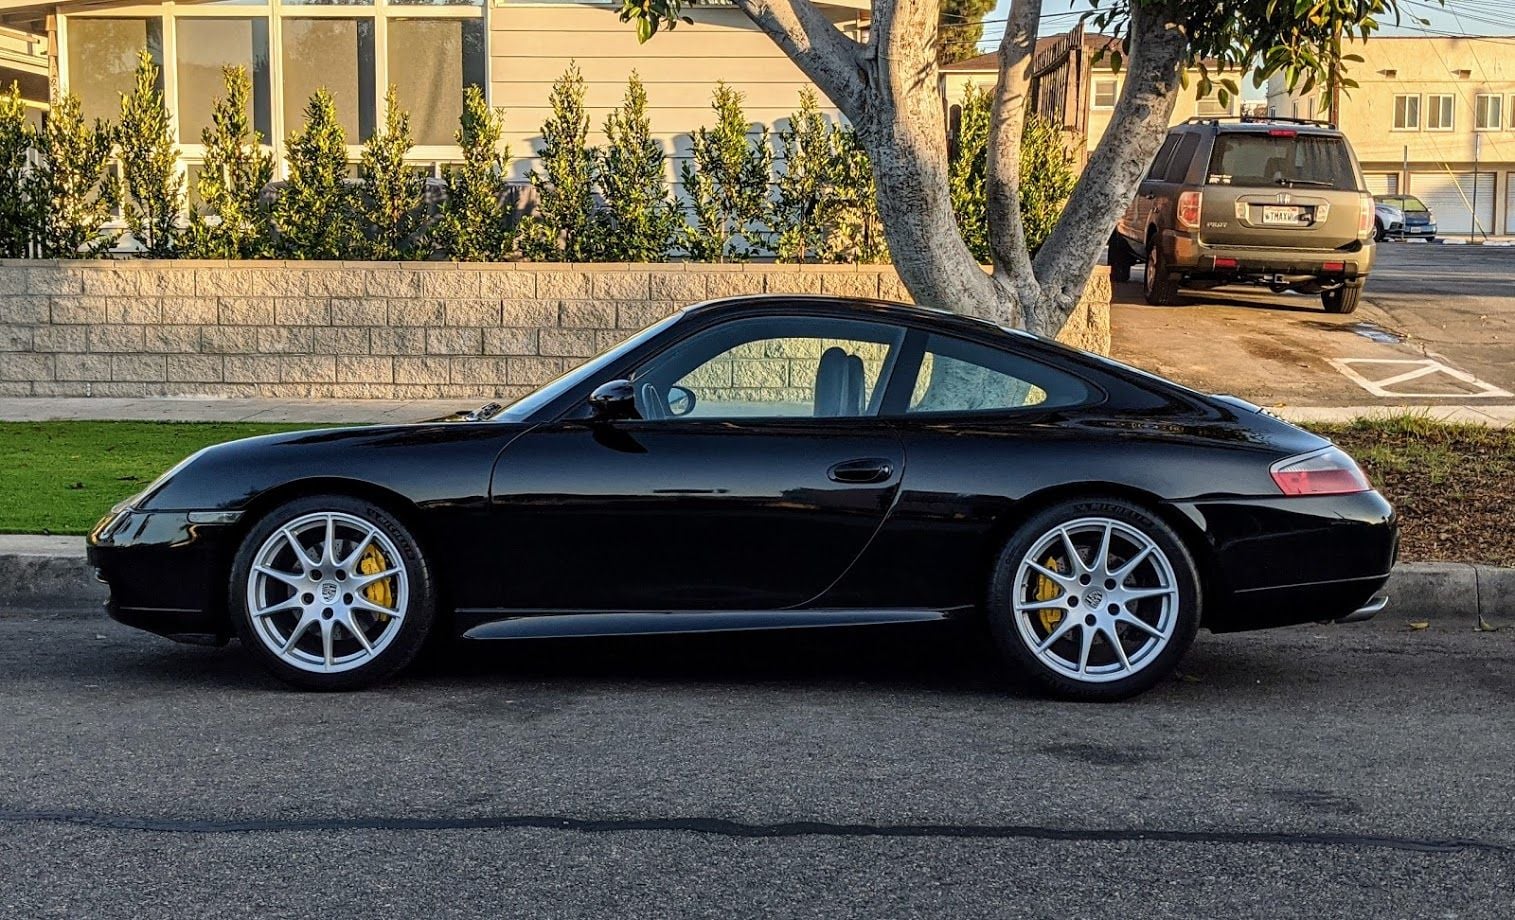 1999 Porsche 911 - 1999 Porsche 911 Carrera 2 (C2) Well Sorted - Fresh Engine Rebuild - Ohlins - Manual - Used - VIN WP0AA2999XS621248 - 94,000 Miles - 6 cyl - 2WD - Manual - Coupe - Black - Los Angeles, CA 90068, United States